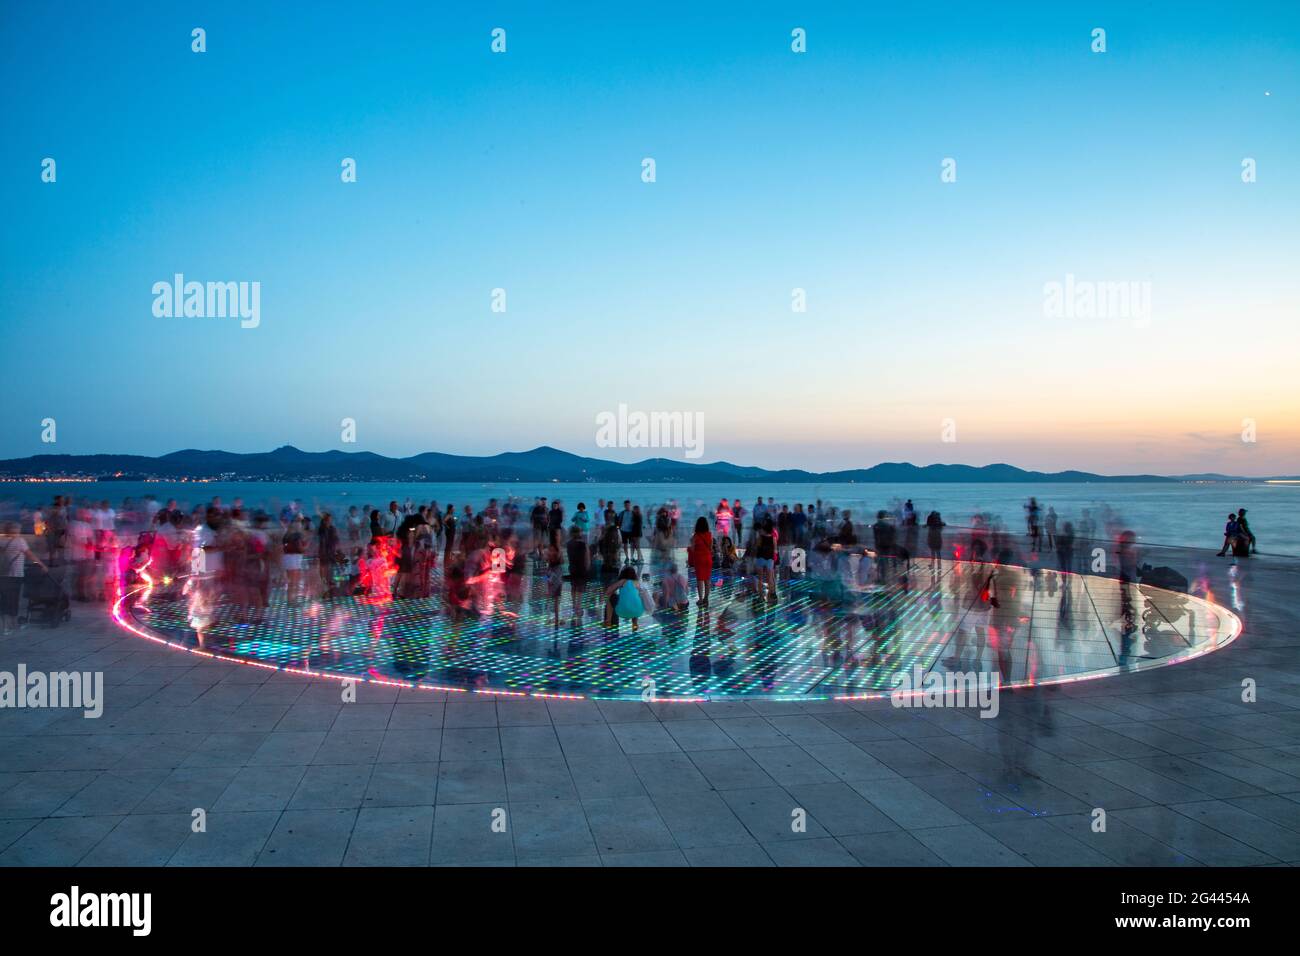 People gather on the magnificent monument to the sun at dusk, Zadar, Zadar, Croatia, Europe Stock Photo